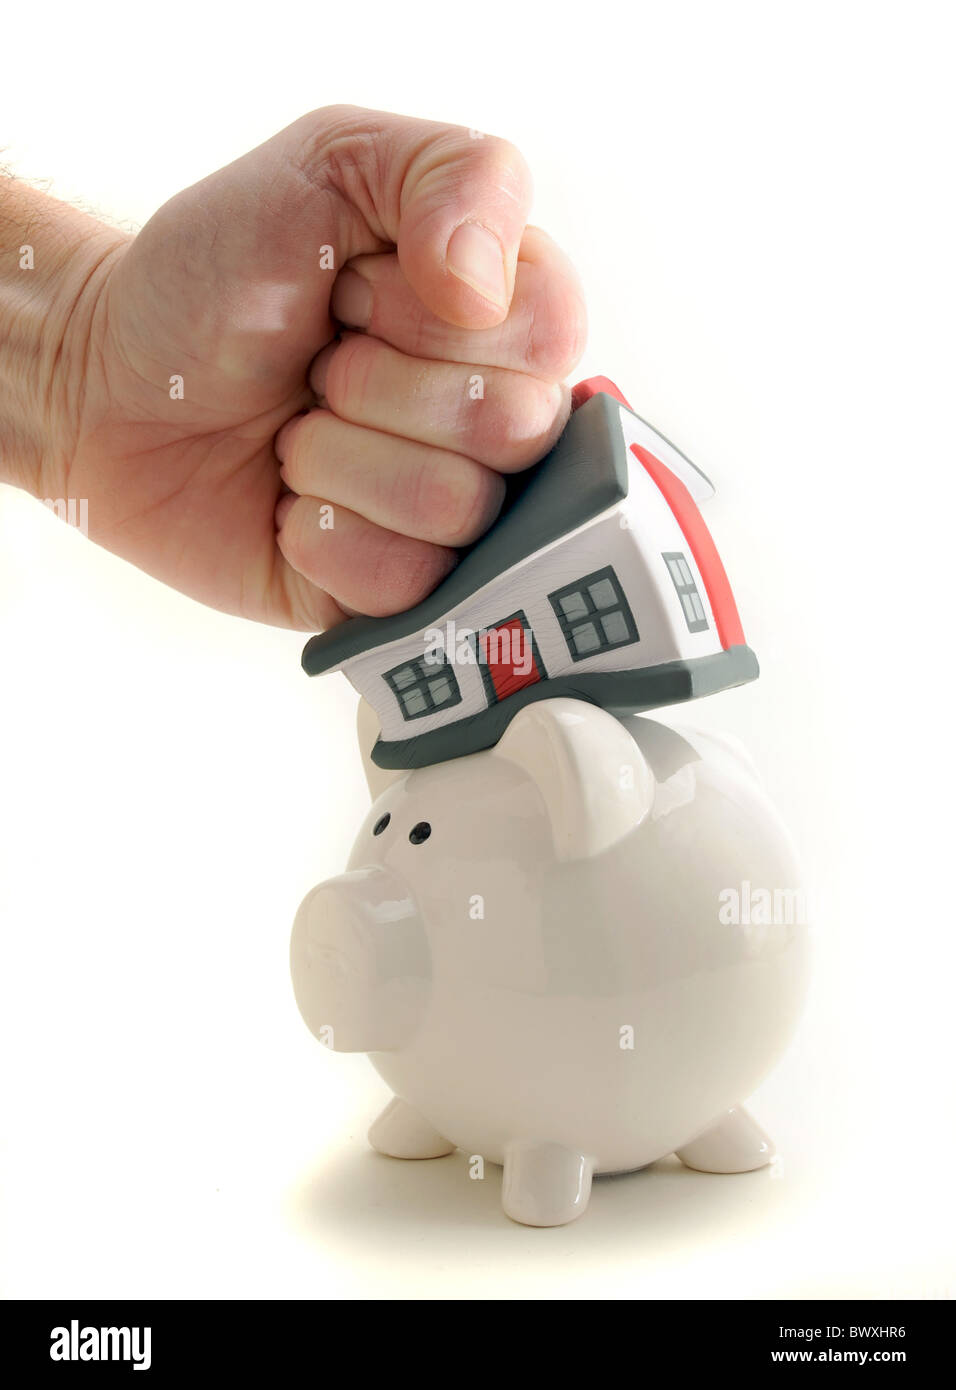 HOUSE HIT AND SQUASHED BY MANS HAND ON PIGGY BANK RE SAVINGS HOUSING MARKET MORTGAGES HOUSE PRICES ETC UK Stock Photo